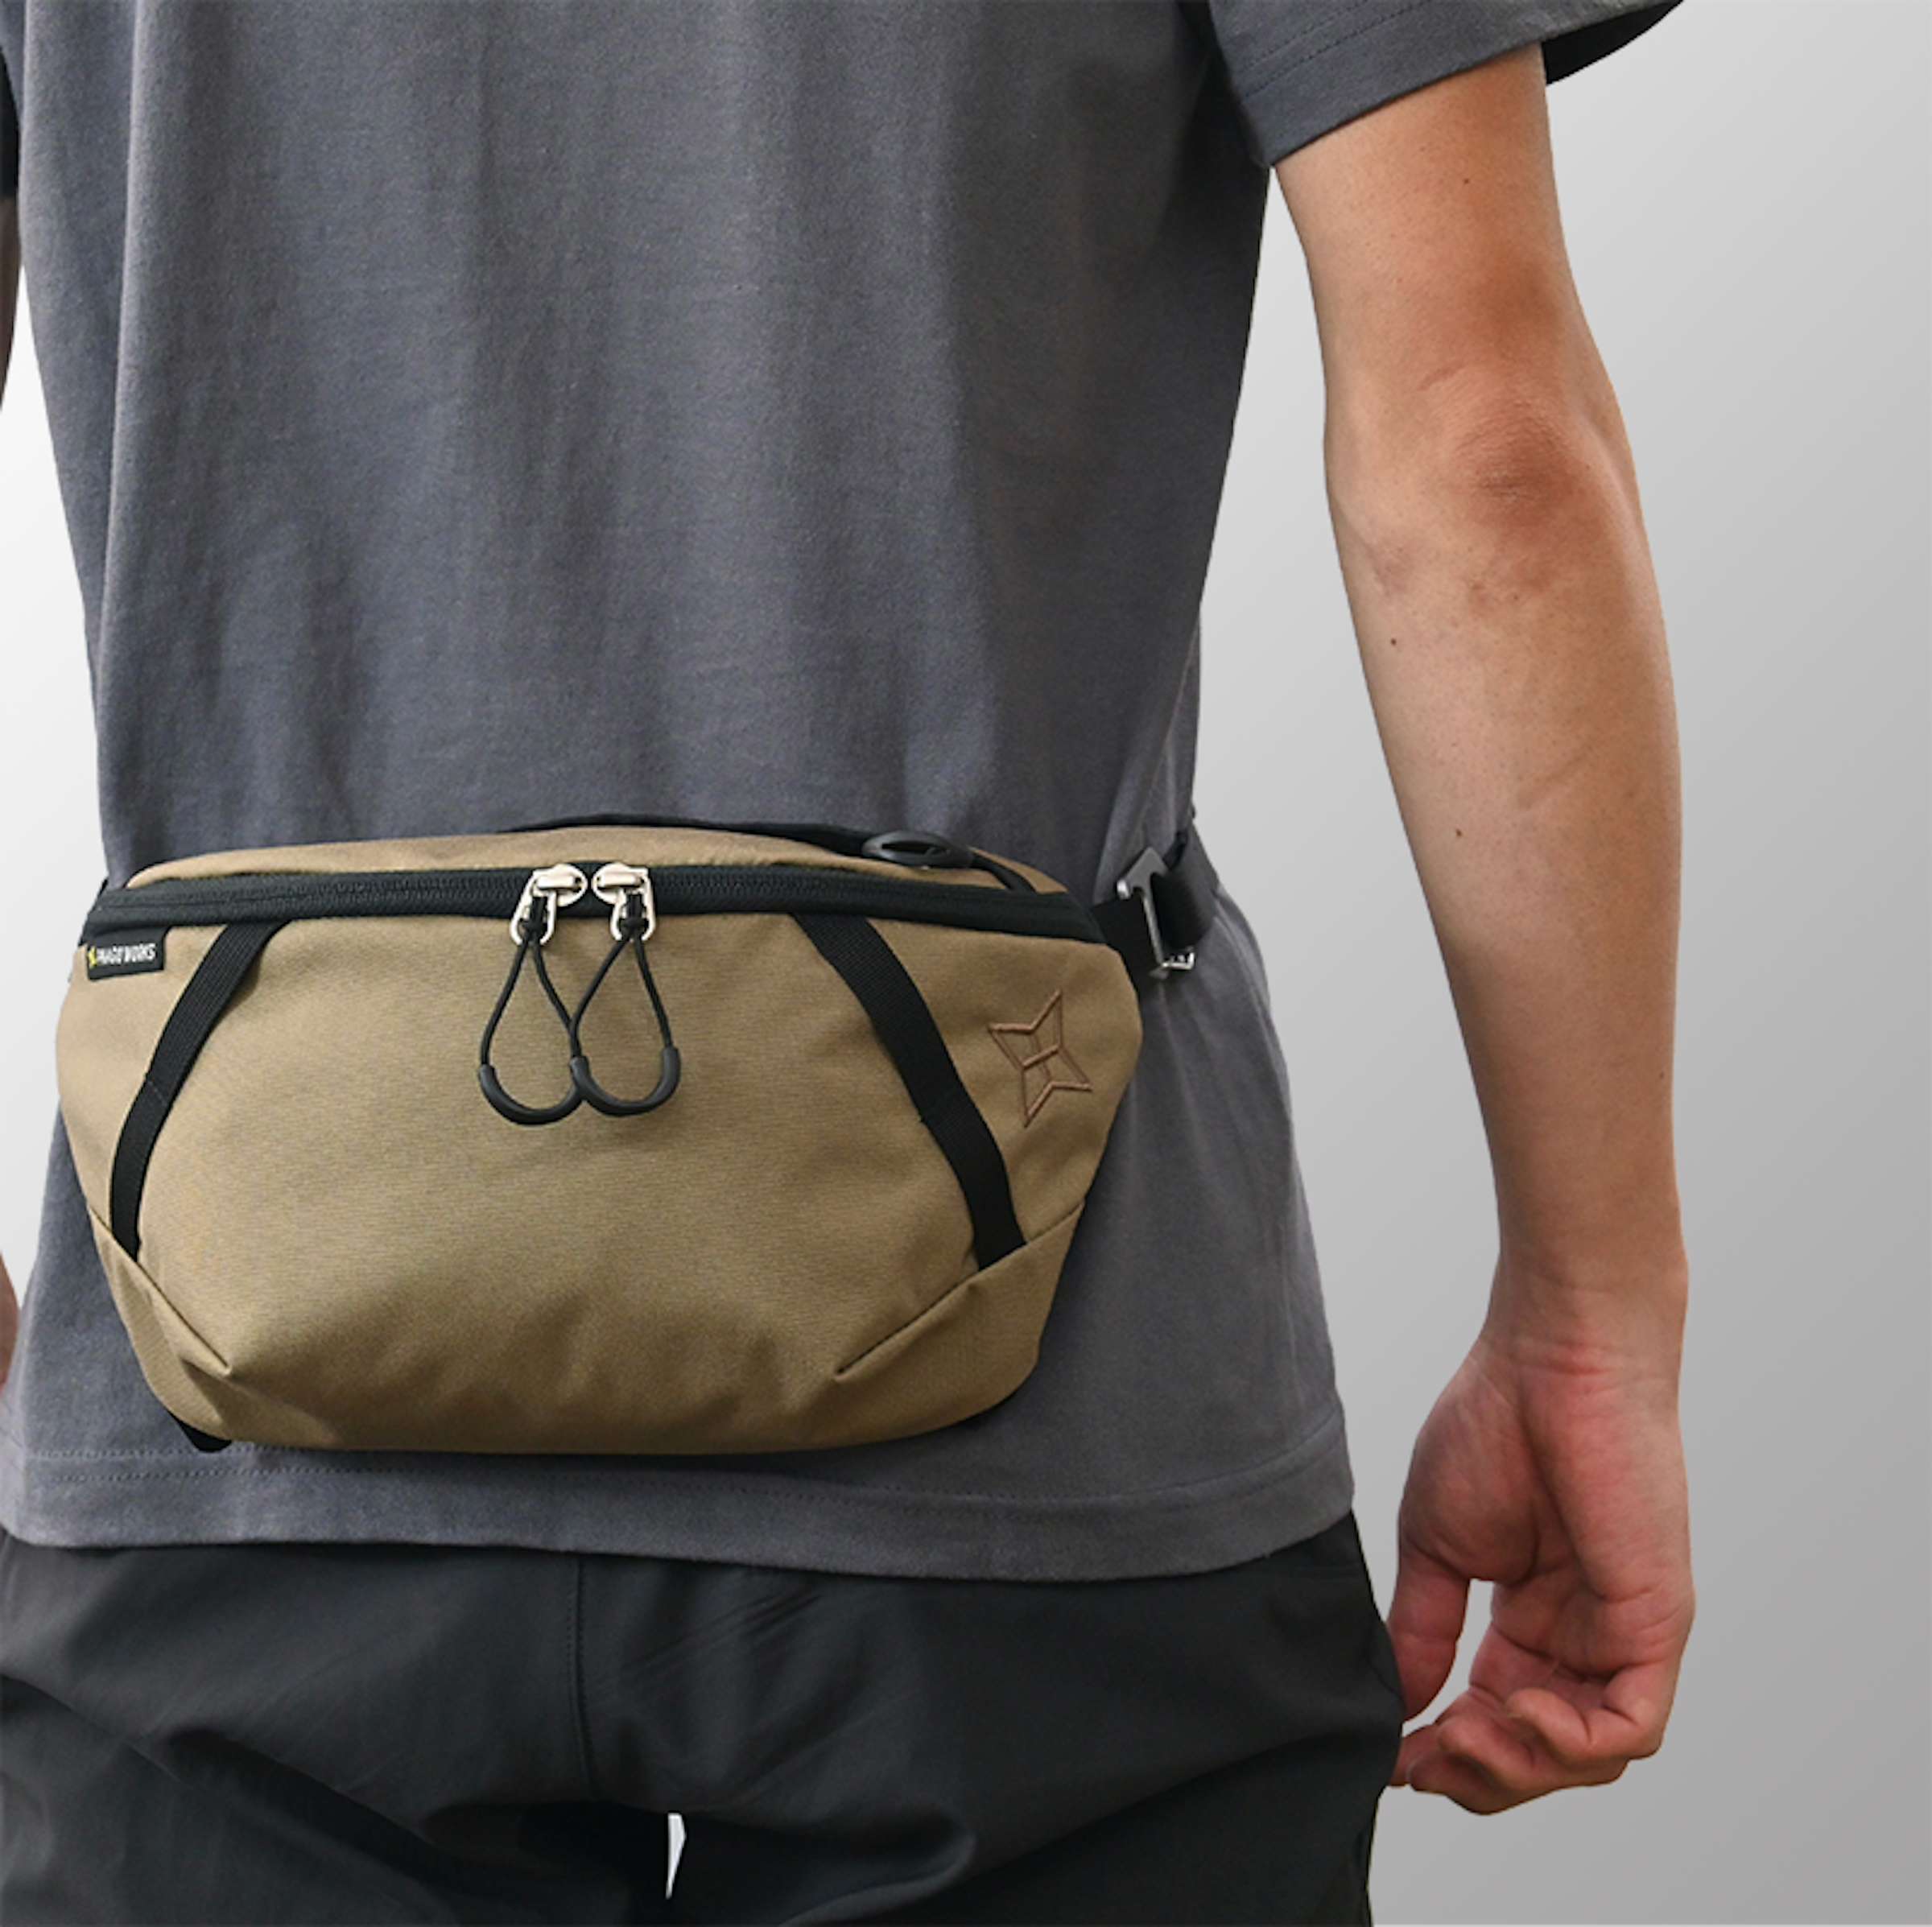 With an adjustable length of the included belt, it can be used as a waist bag. The center of gravity is again closer to the body, providing stability.